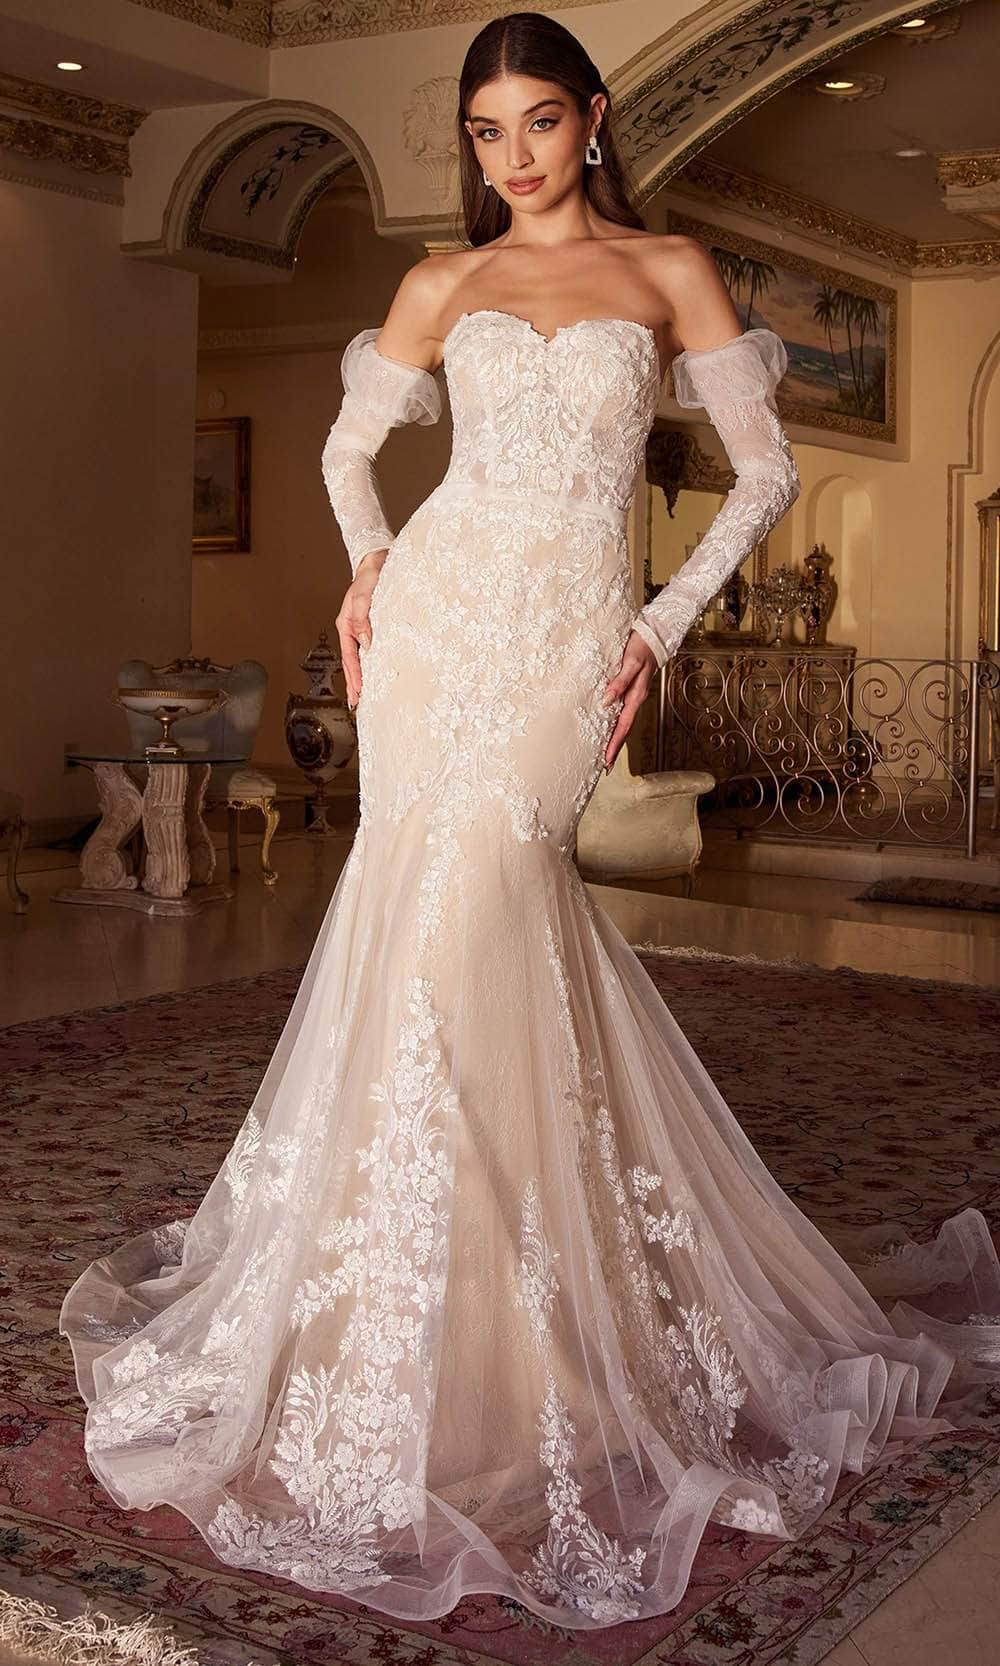 Image of Ladivine WL008 - Lace Embellished Strapless Bridal Gown